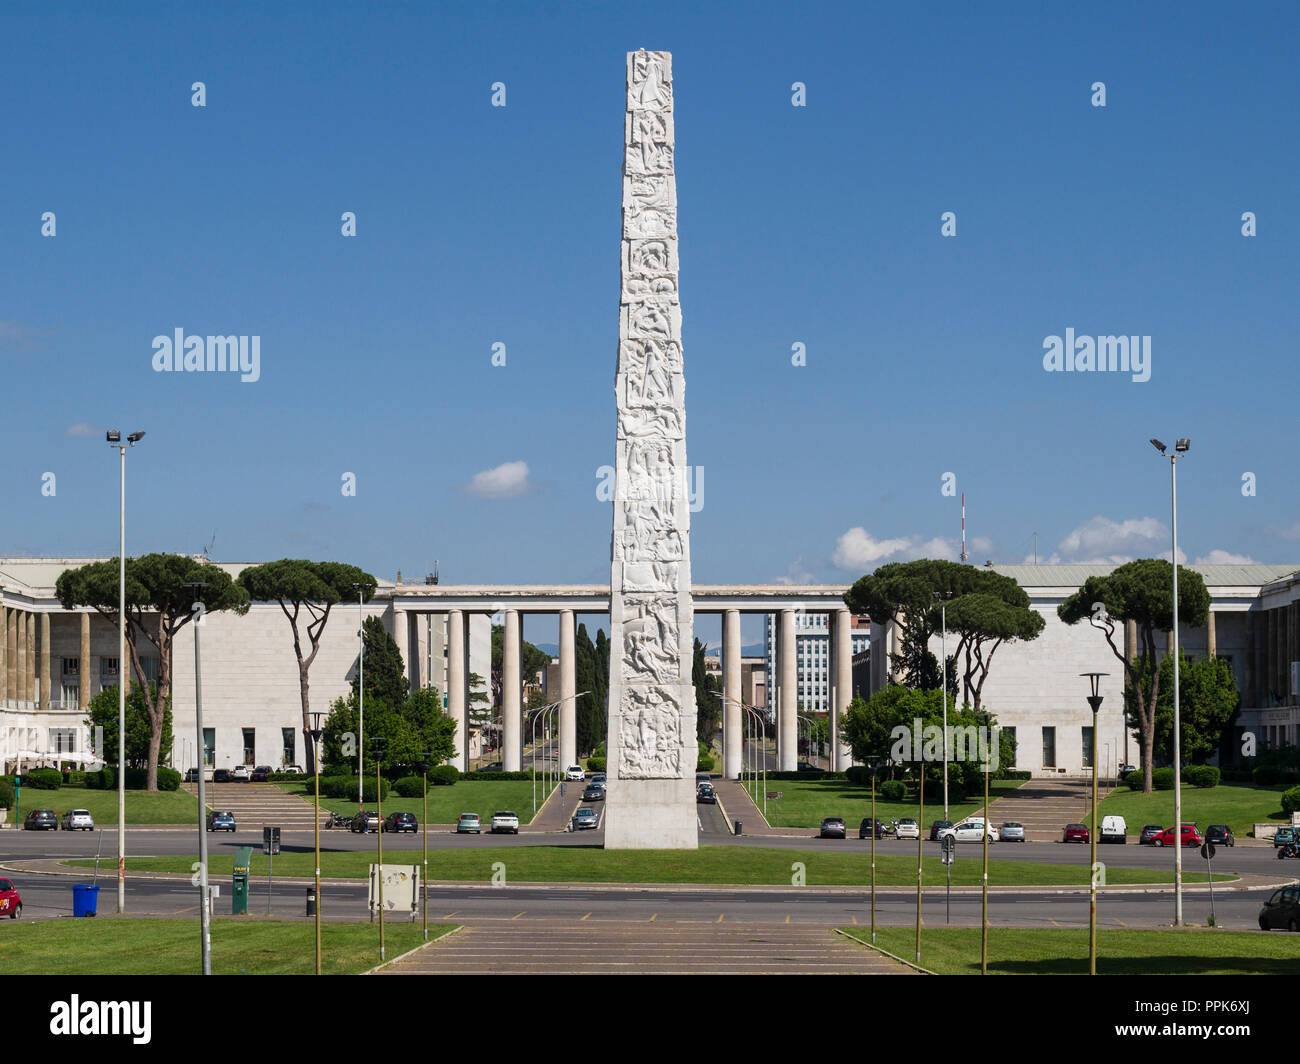 Rome. Italy. EUR. The obelisk dedicated to Guglielmo Marconi on the Piazza Guglielmo Marconi.  The 45 metre high obelisk made with reinforced concrete Stock Photo